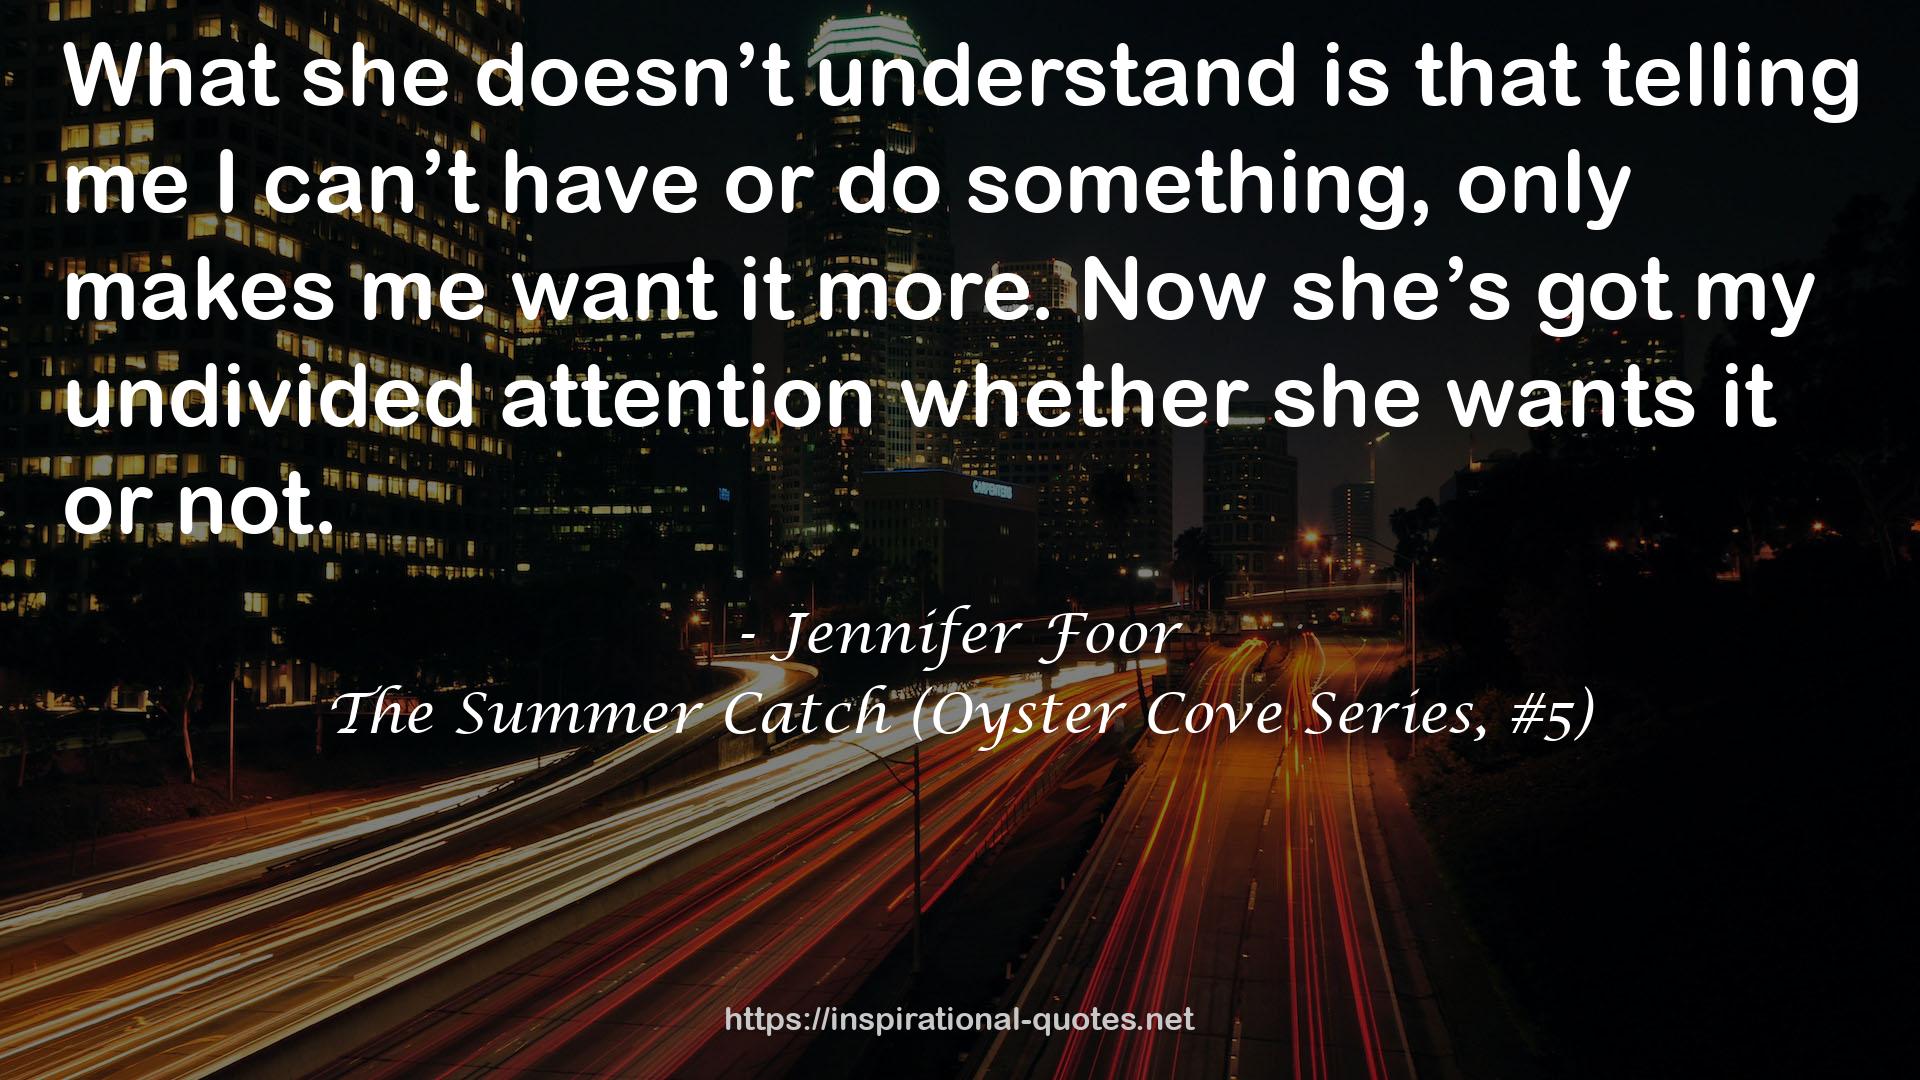 The Summer Catch (Oyster Cove Series, #5) QUOTES